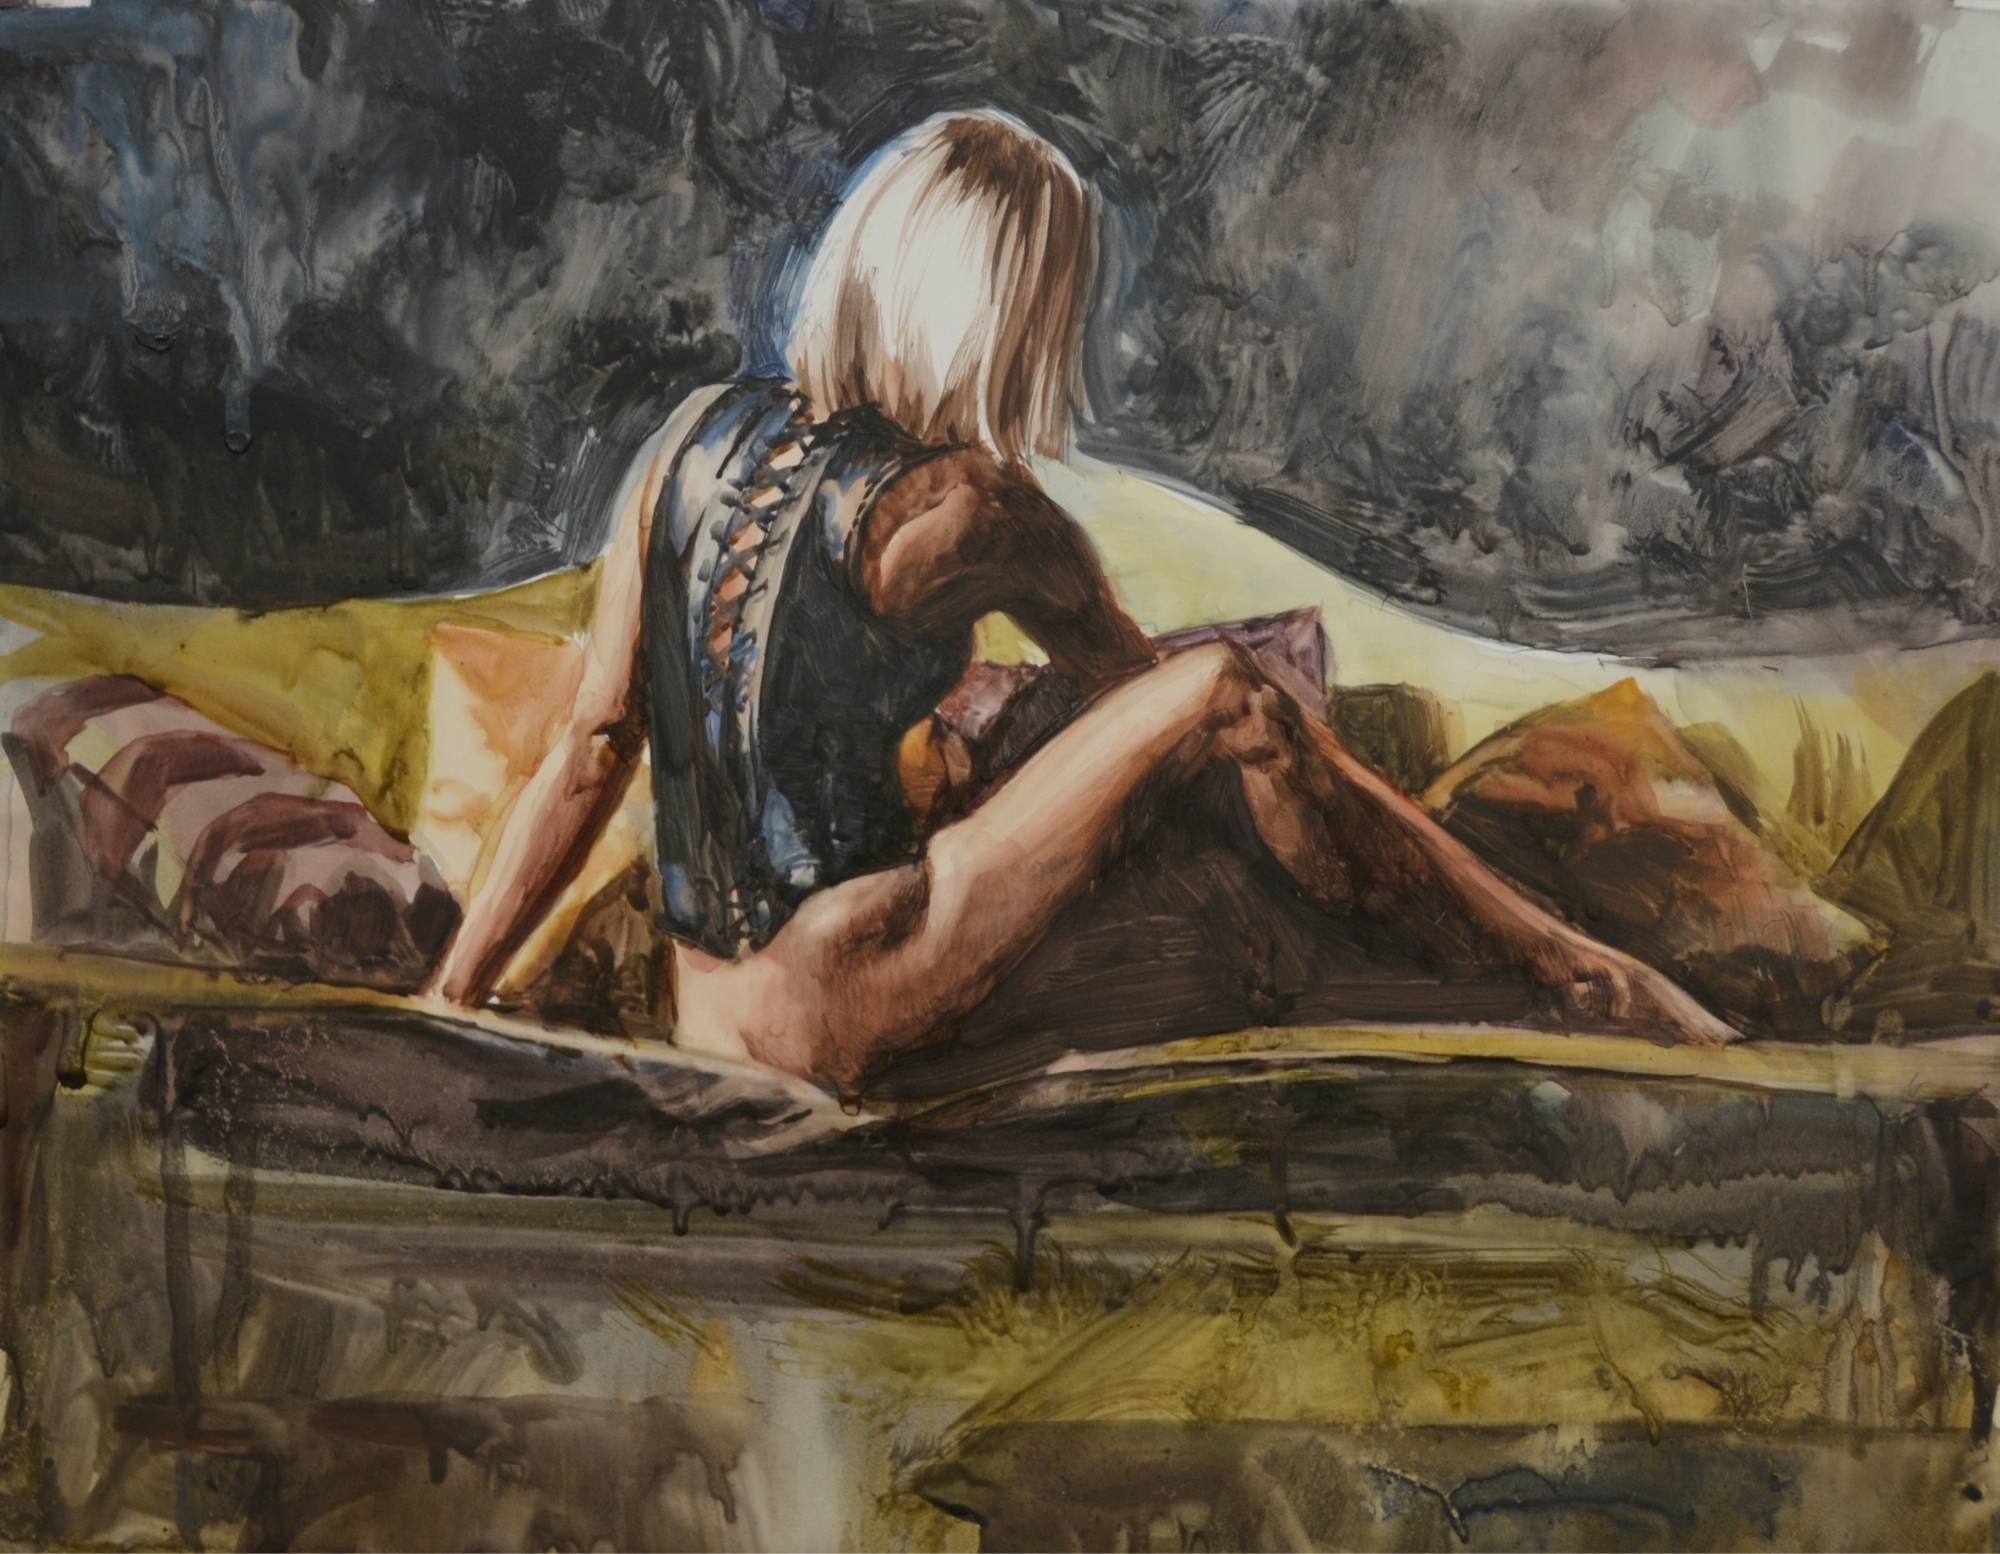 watercolor painting of a figure facing away from us wearing top that laces up in the back, sitting on a green couch